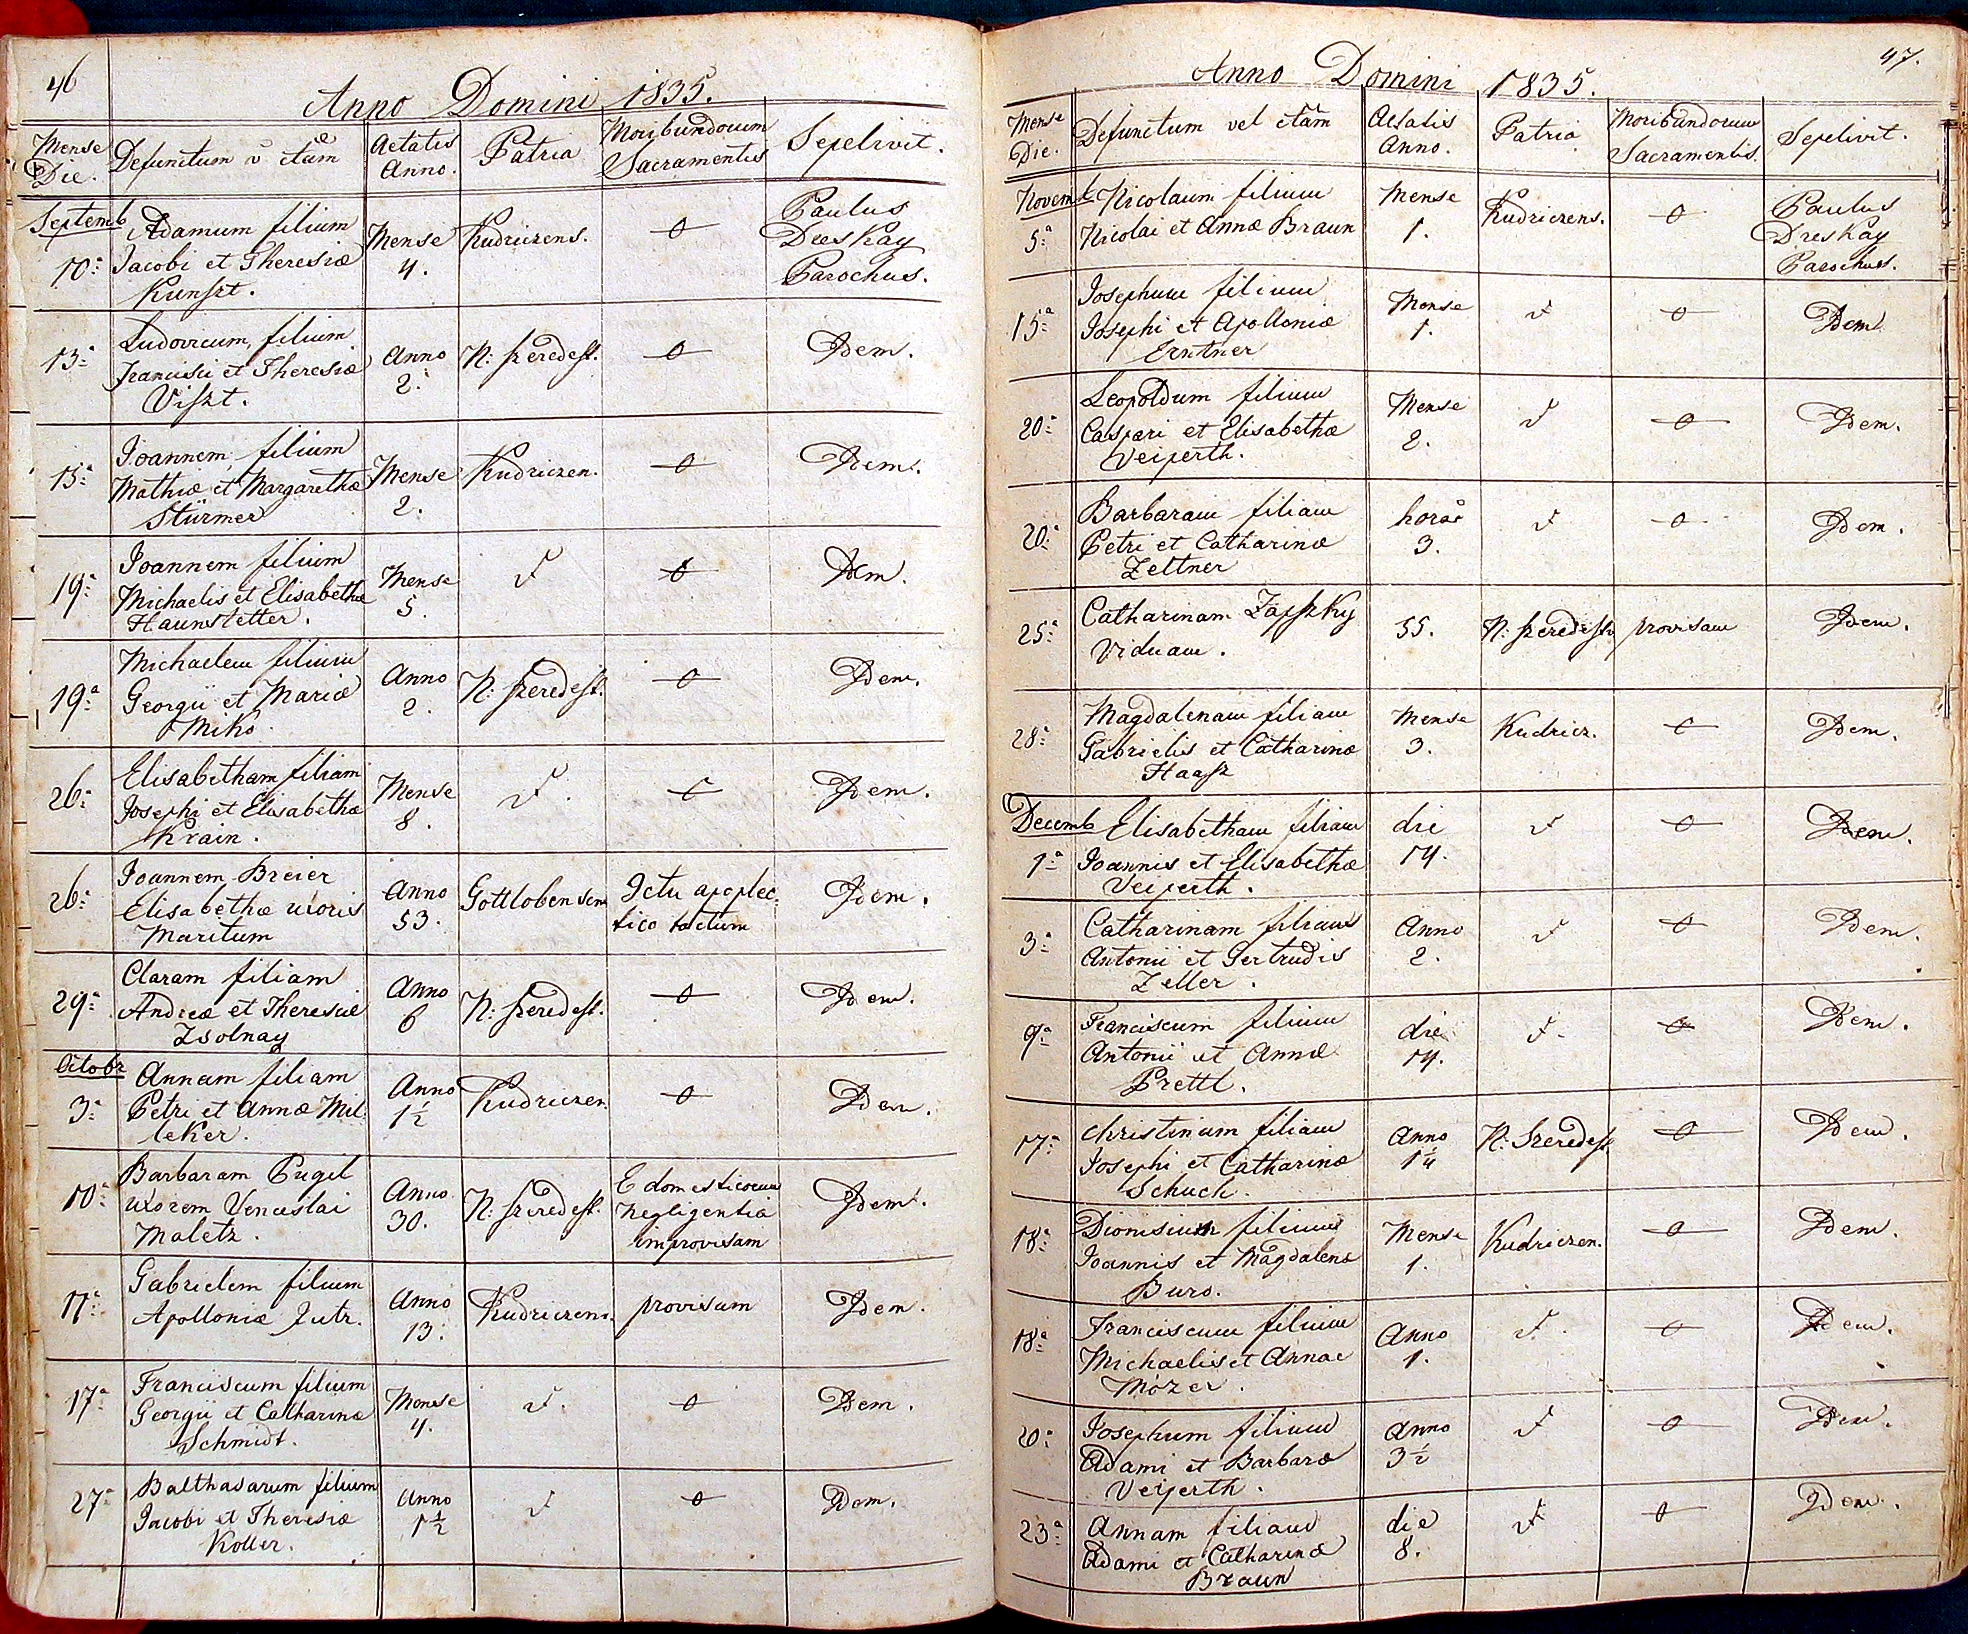 images/church_records/DEATHS/1775-1828D/046 i 047